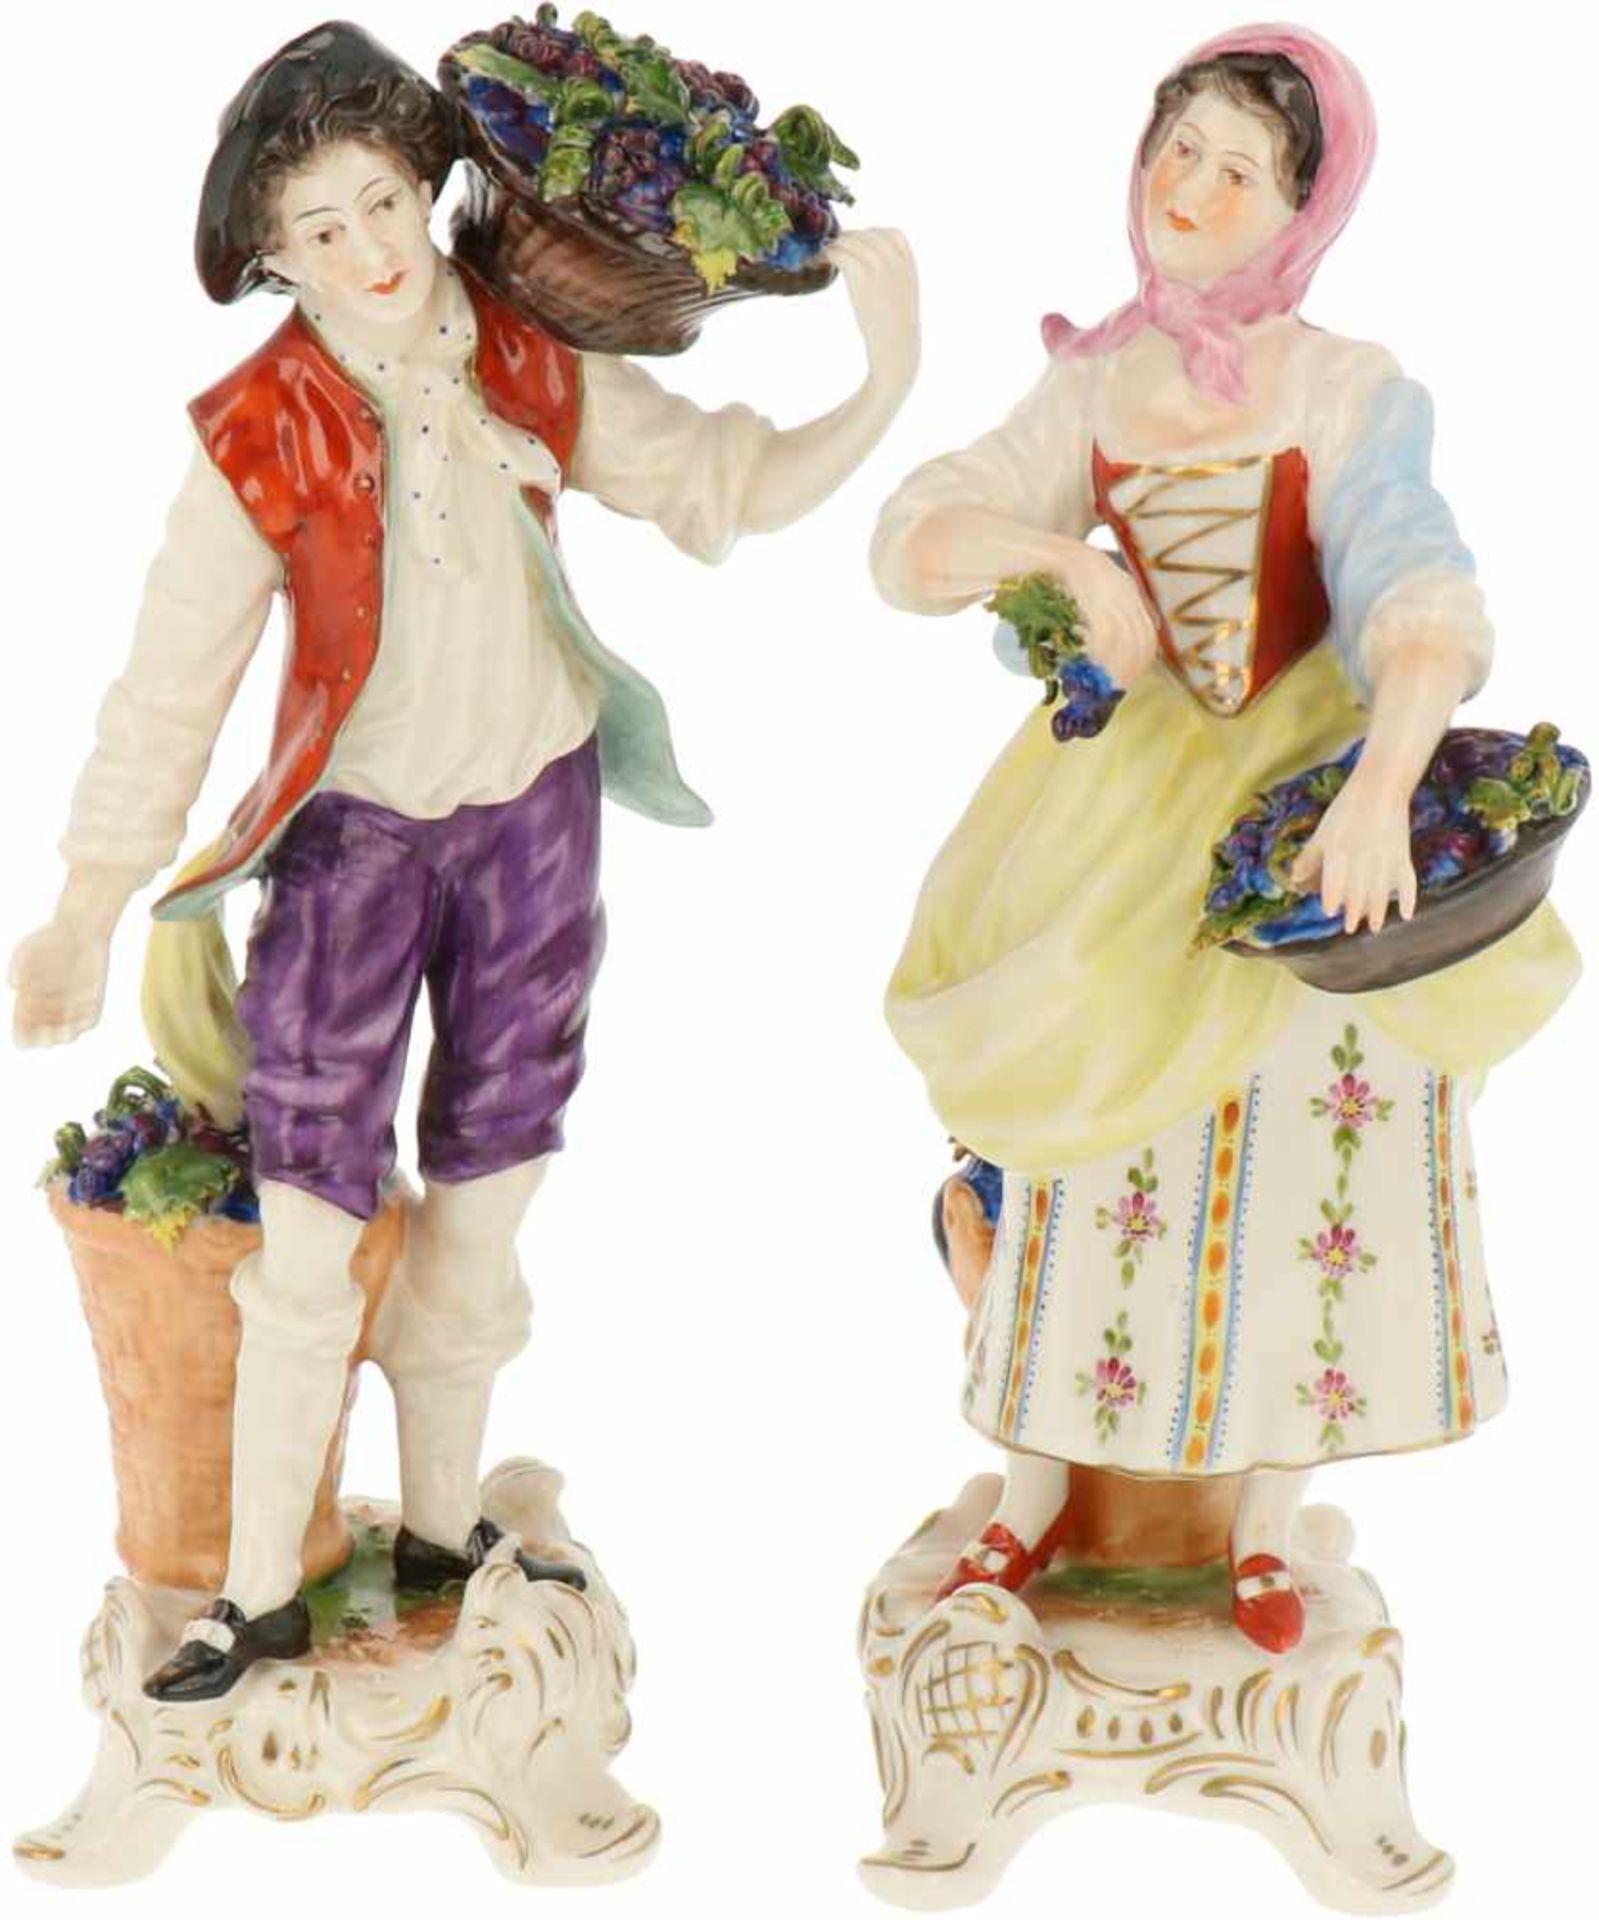 A set of procelain figurines of a winegrower and farmer's wife. Volkstedt, Germany. Mid 20th